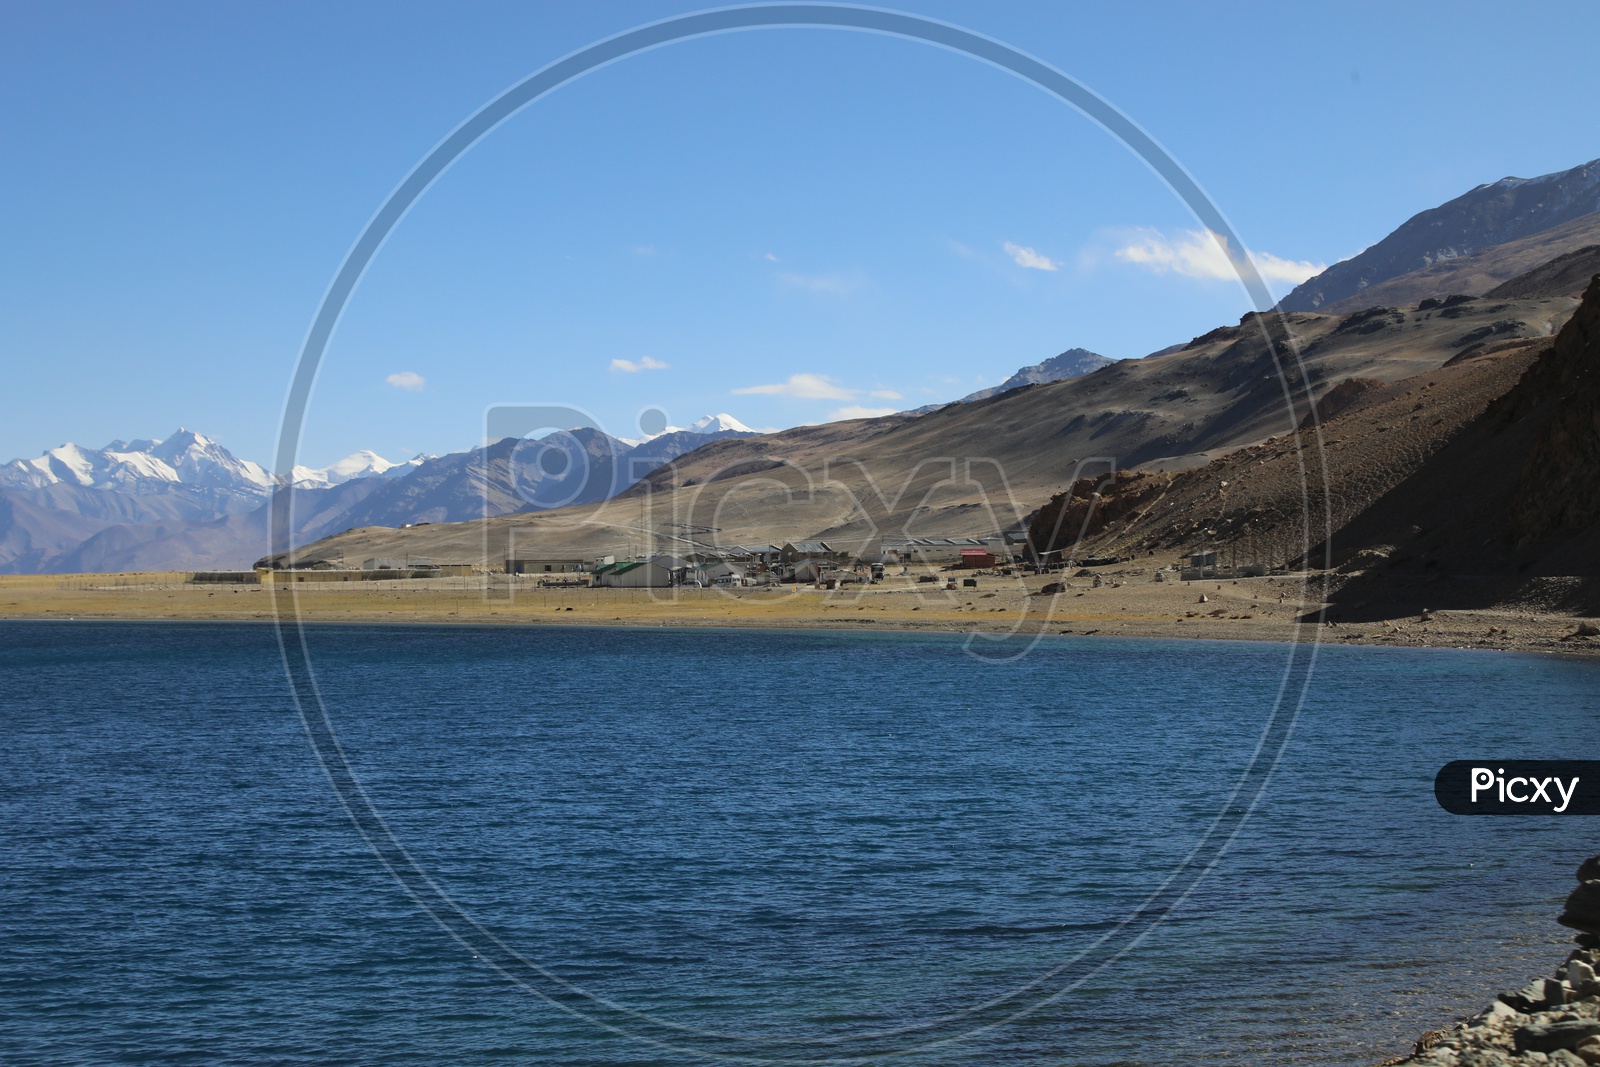 Beautiful Landscape of Snow Capped Mountains of Leh with tsomoriri lake in the foreground